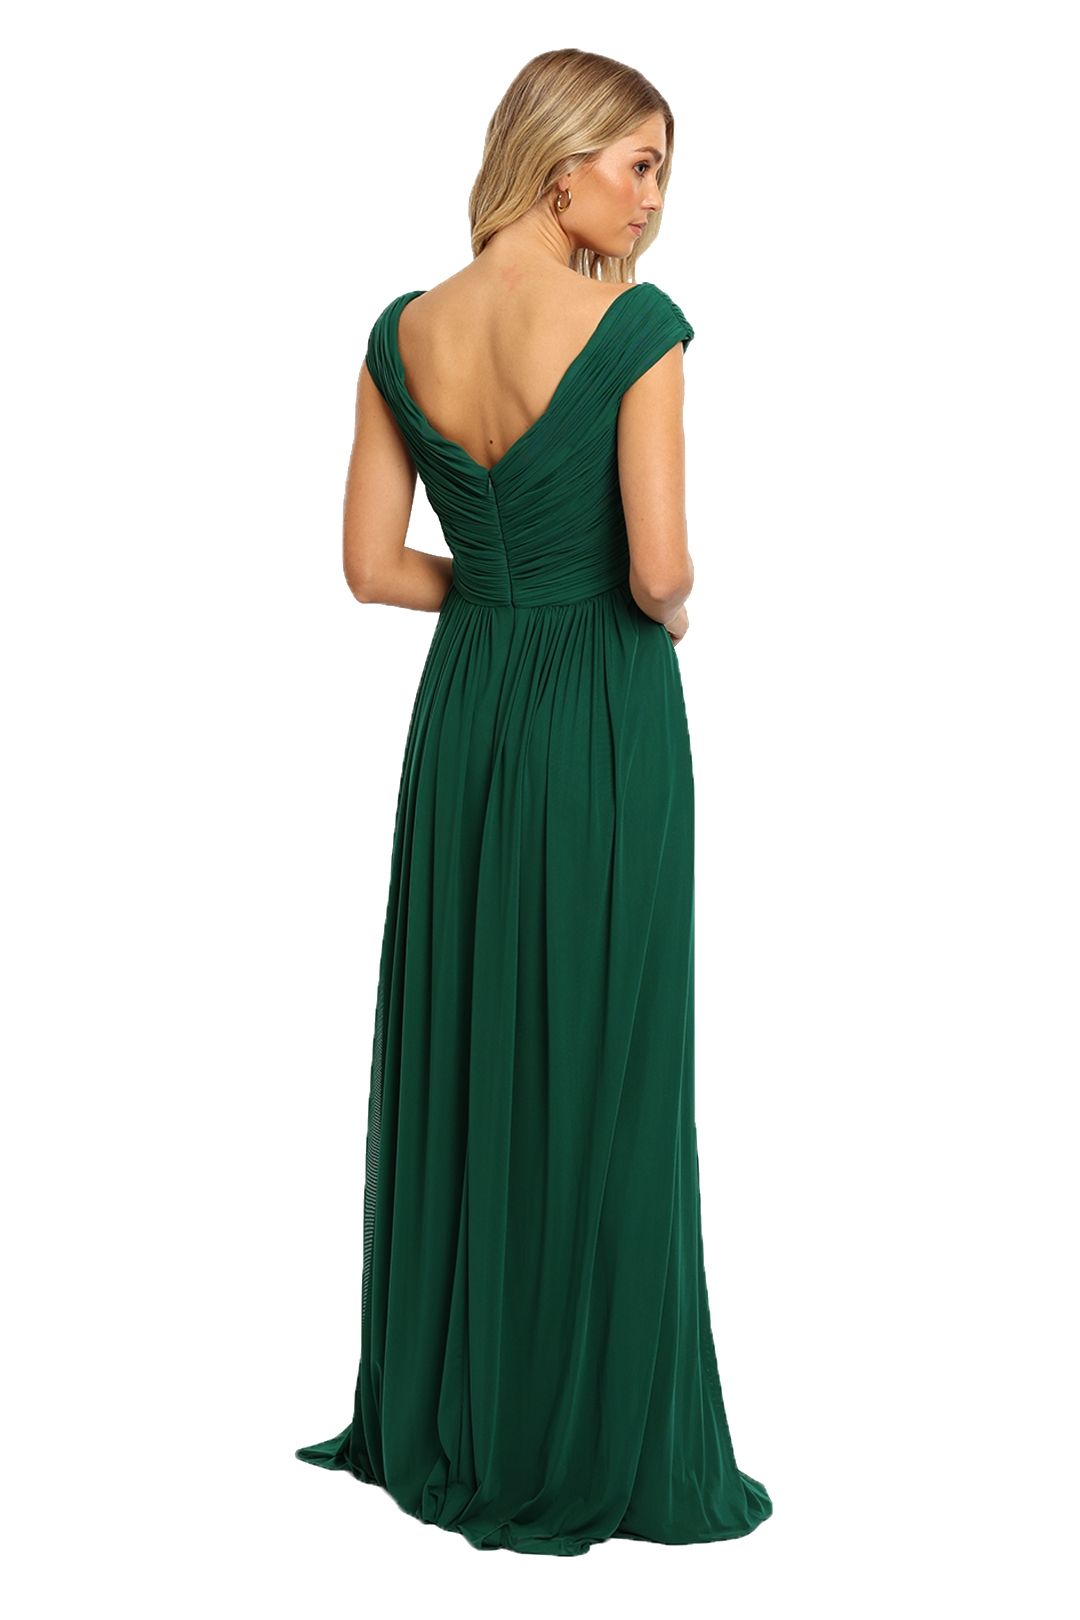 Tania Olsen Molly Gown Emerald